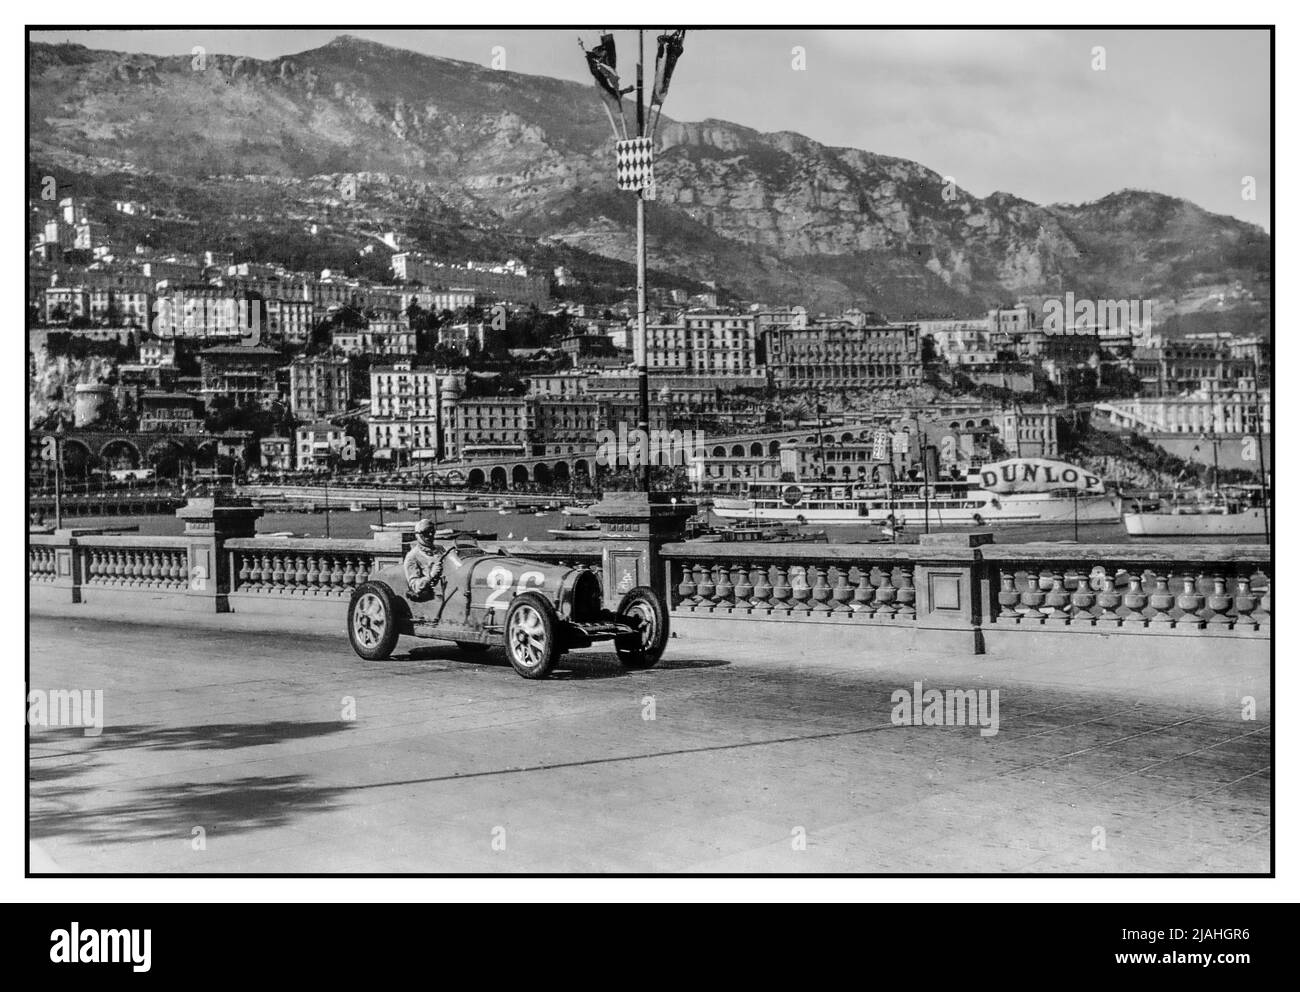 Monaco Grand Prix 1931 with Achille Varzi driving a works Bugatti Number 26 with the harbour of Monaco behind.The 1931 Monaco Grand Prix was a Grand Prix motor race held at the Circuit de Monaco on 19 April 1931. With 16 Bugattis in a field of 23 cars, the event was close to being a single-make race. Among the 16 were four factory-team Type 51s driven by the Monegasque Louis Chiron, the Italian Achille Varzi and the French Albert Divo and Guy Bouriat. Stock Photo